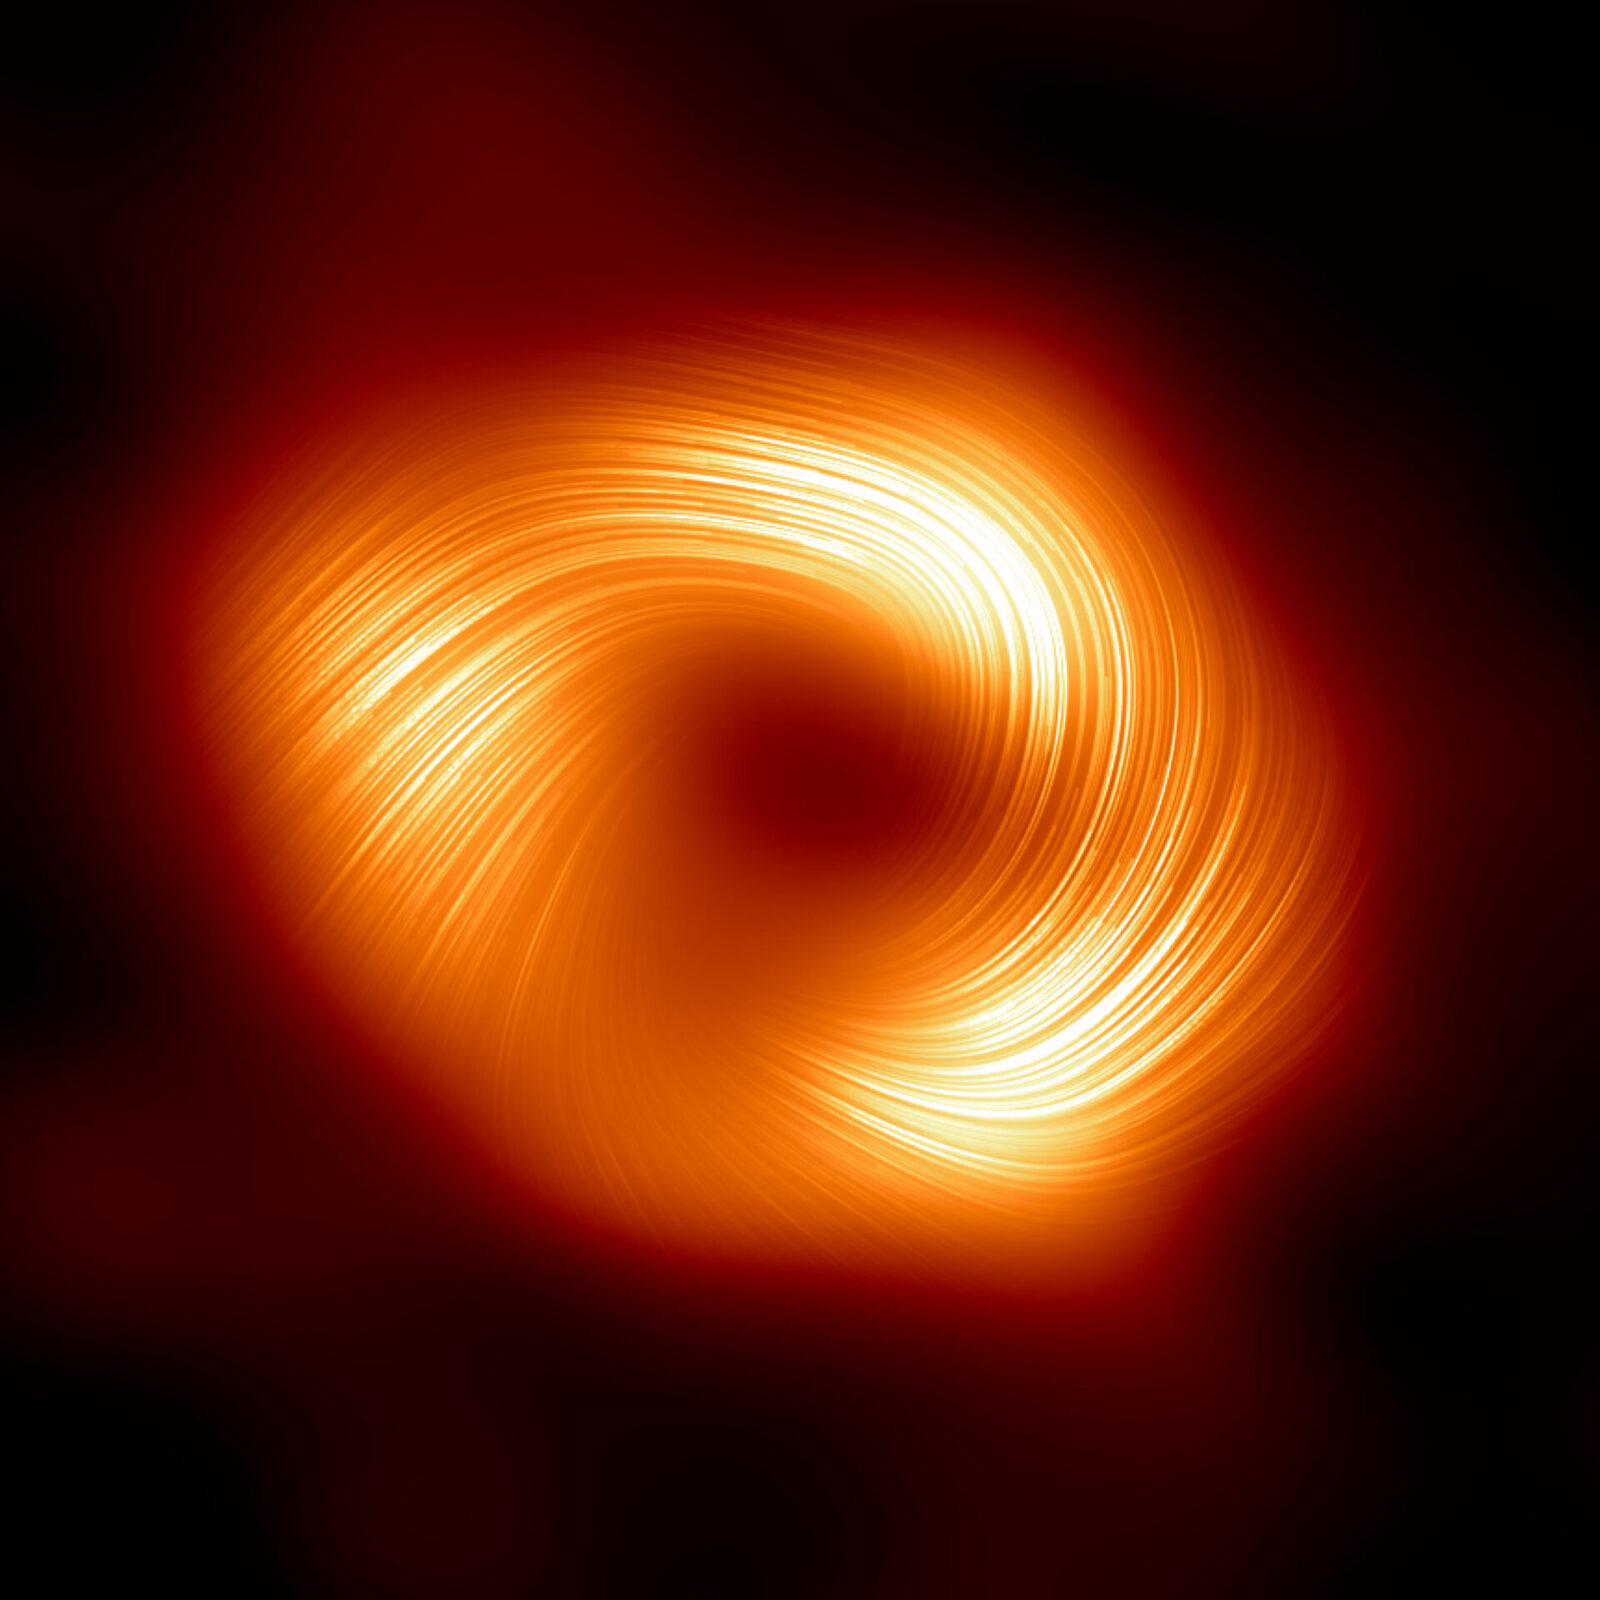 A polarized emission view of the Milky Way supermassive black hole Sagittarius A*